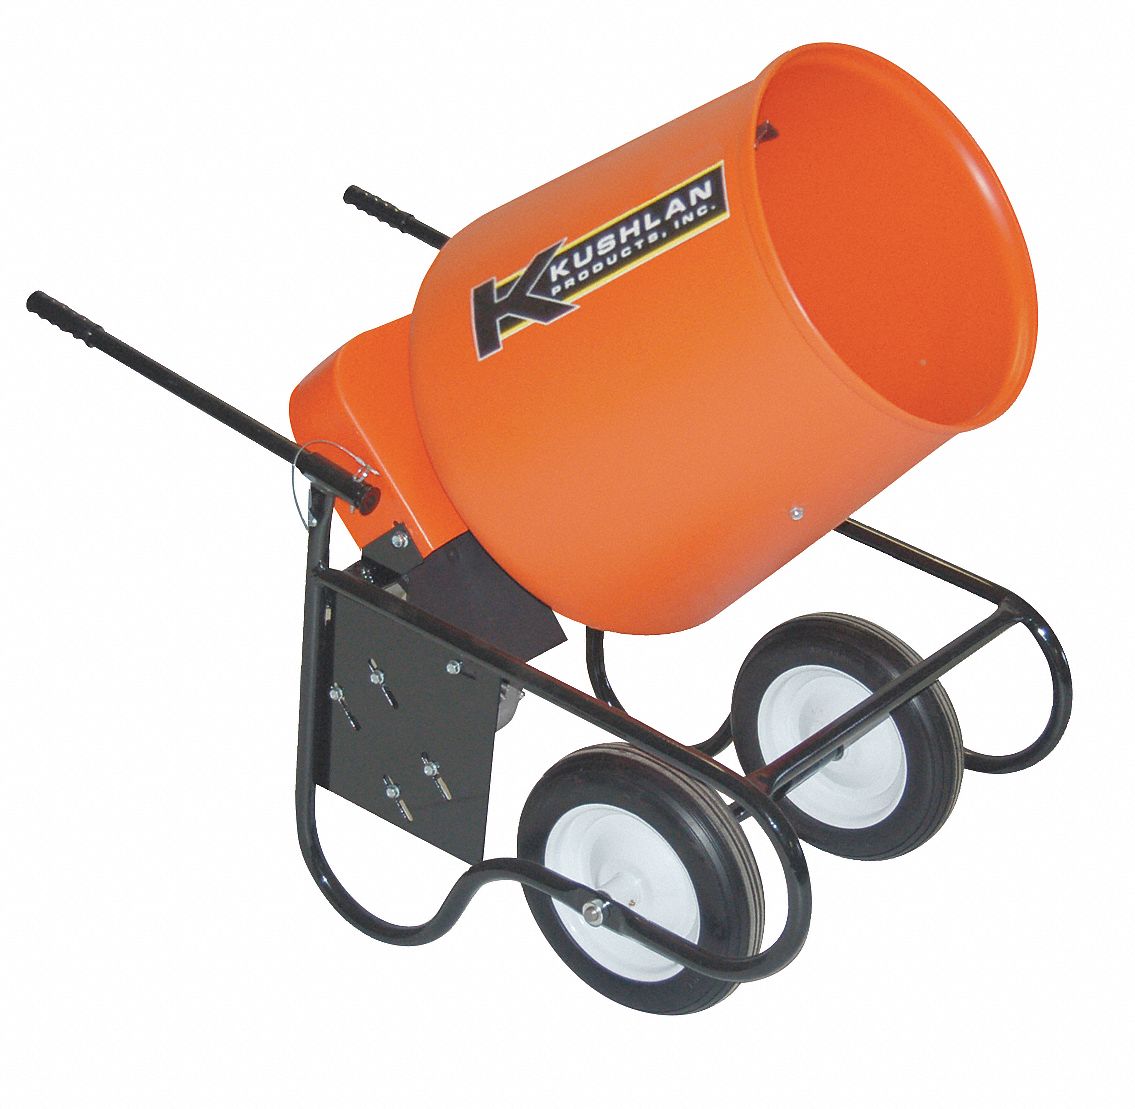 Power Brush Sweepers - Power Brushes, Yard Vacuums and Leaf Blowers -  Grainger Industrial Supply